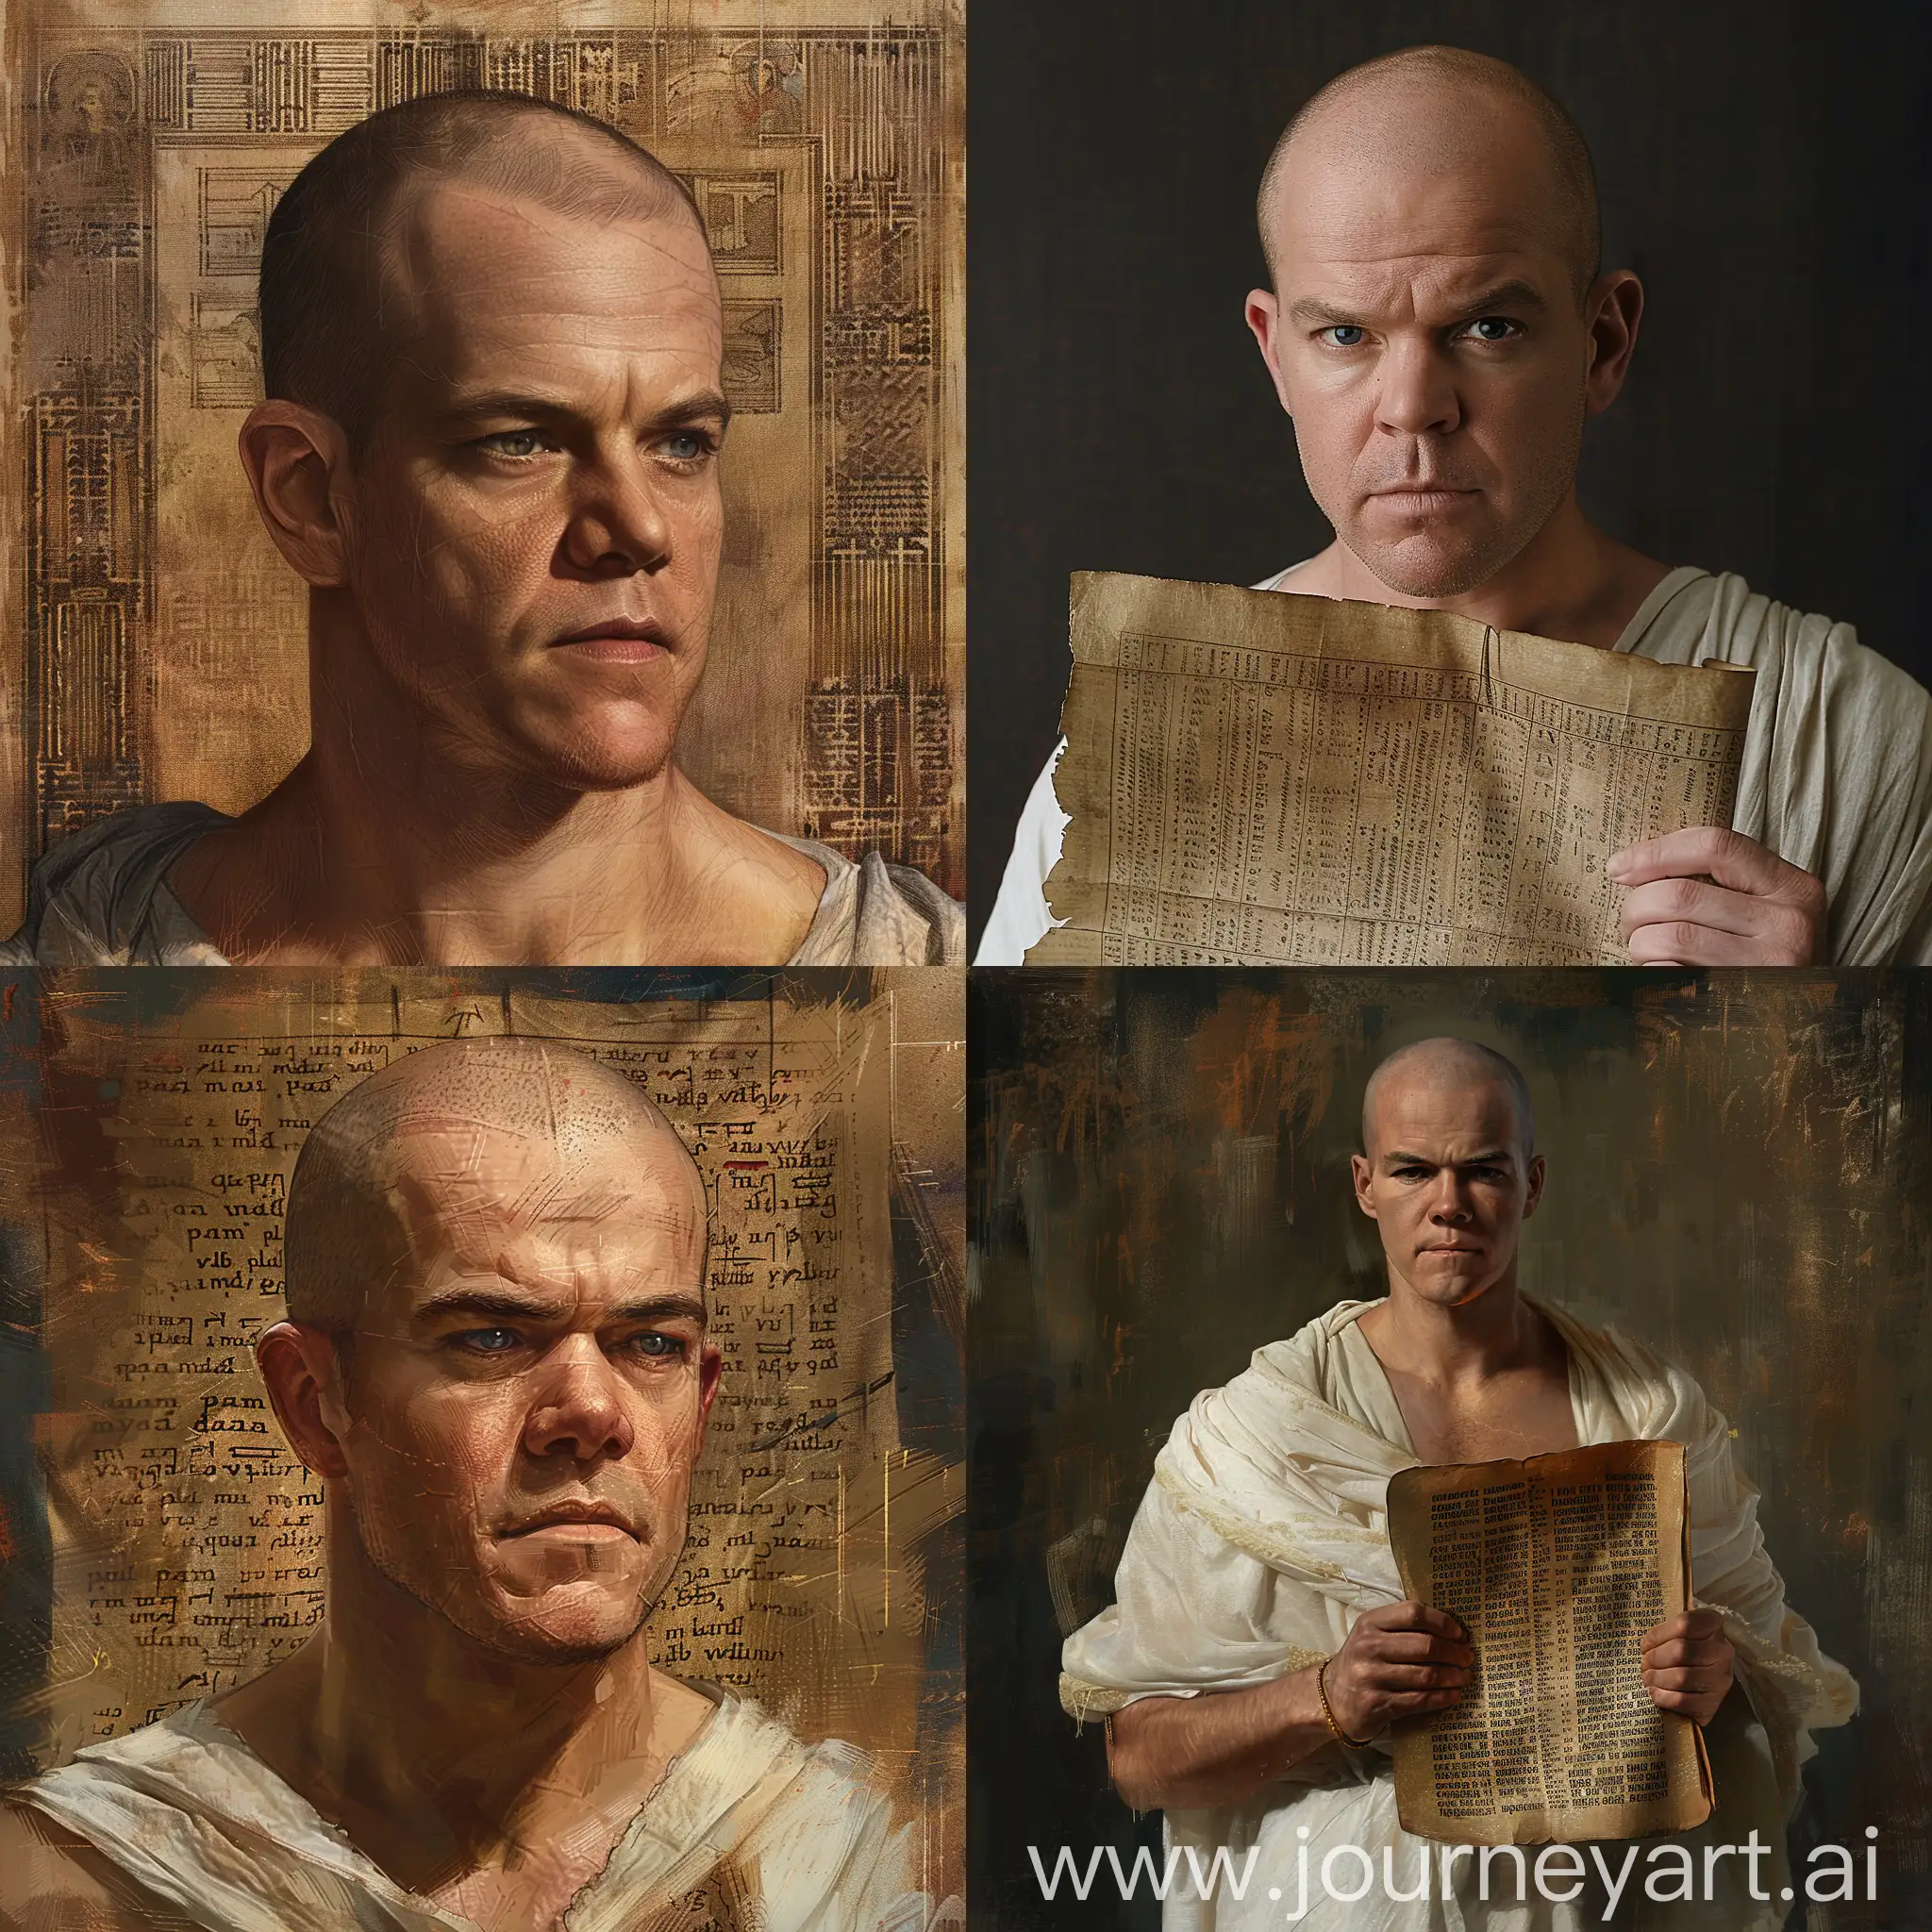 Majestic-Portrait-of-Bald-Matt-Damon-Inspired-by-Da-Vincis-Style-on-Papyrus-from-the-Bible